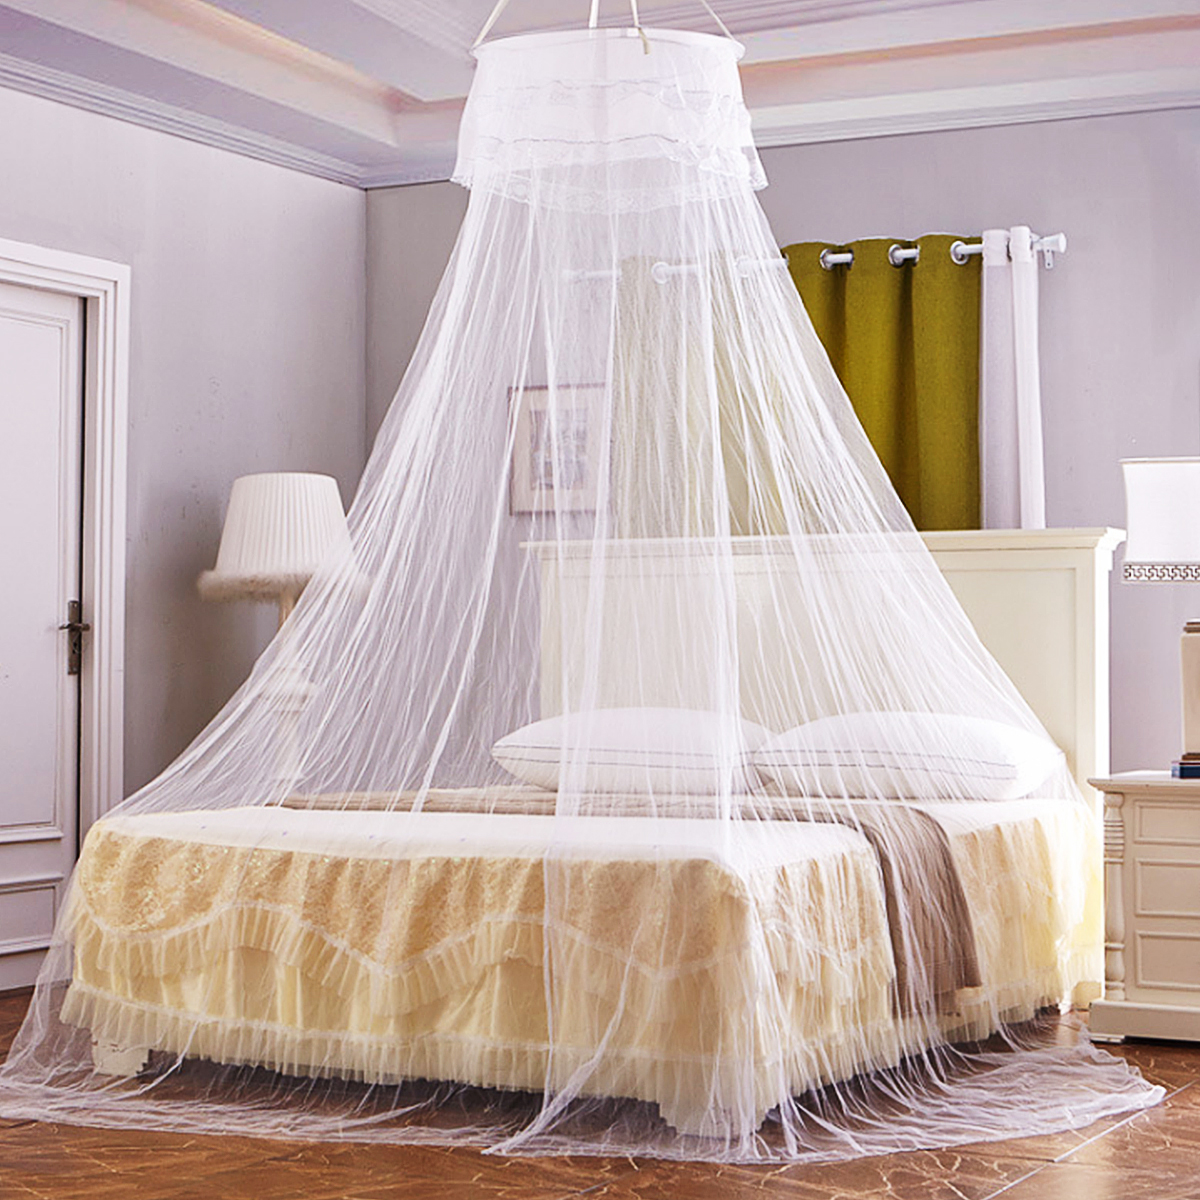 Anti-Mosquito-Round-Ceiling-Mosquito-Net-Dense-And-High-Polyester-Mesh-No-Installation-Mosquito-Net-1866033-8